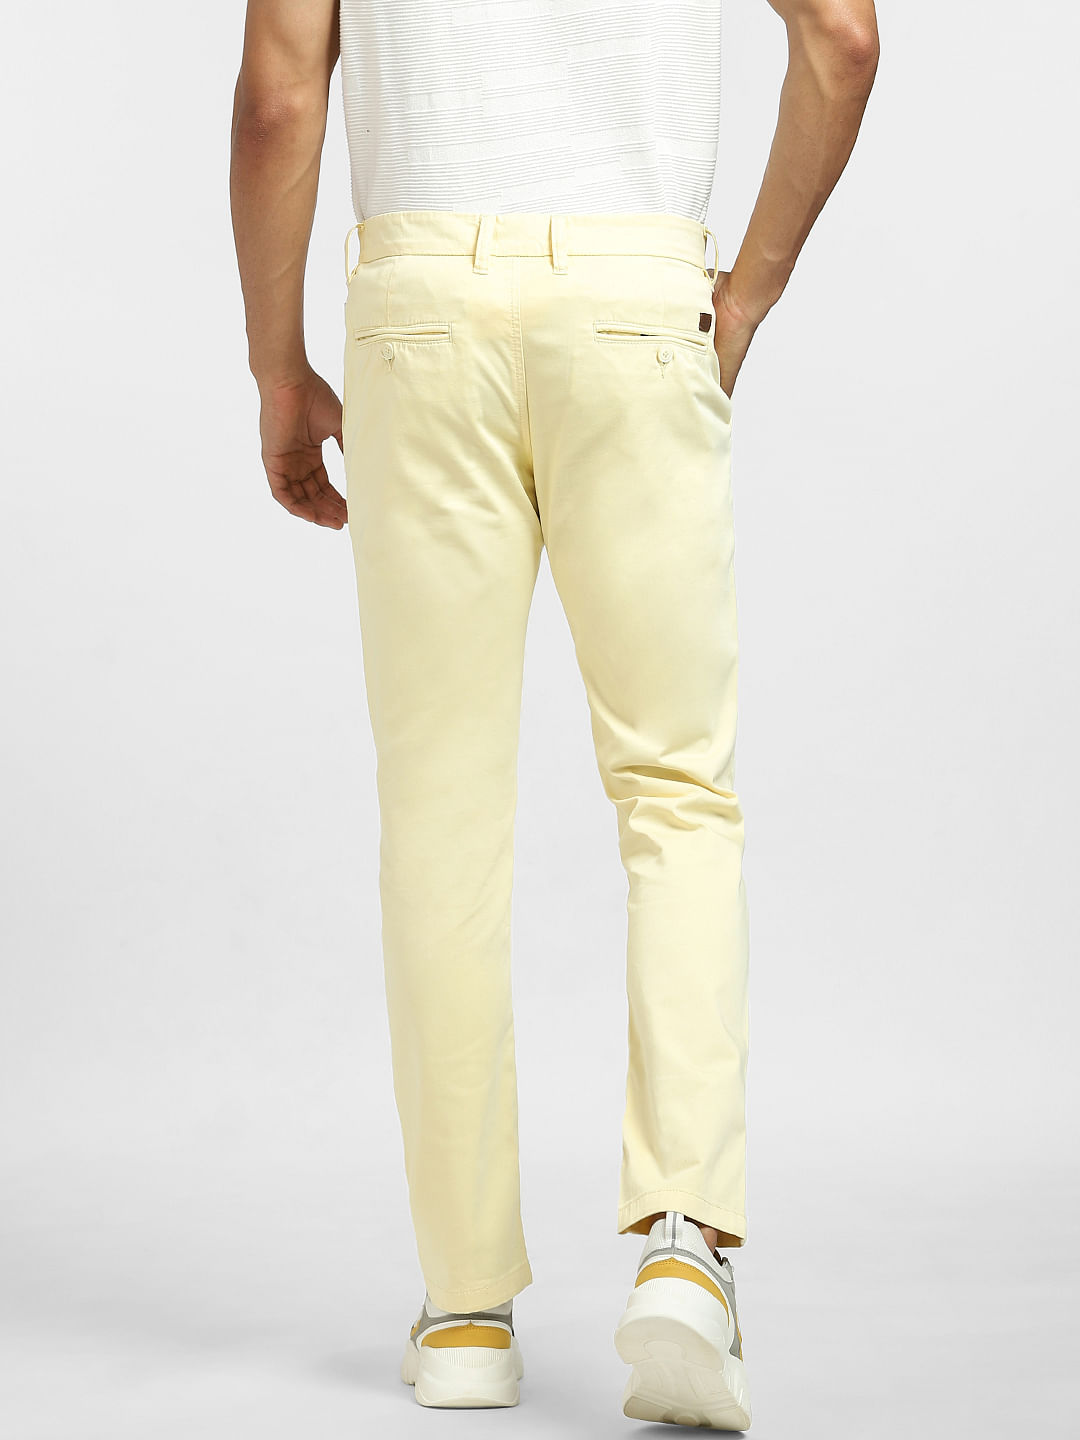 Yellow Jeans Mens Fashion Trends With Light Blue Denim Shirt Jeans   Casual wear